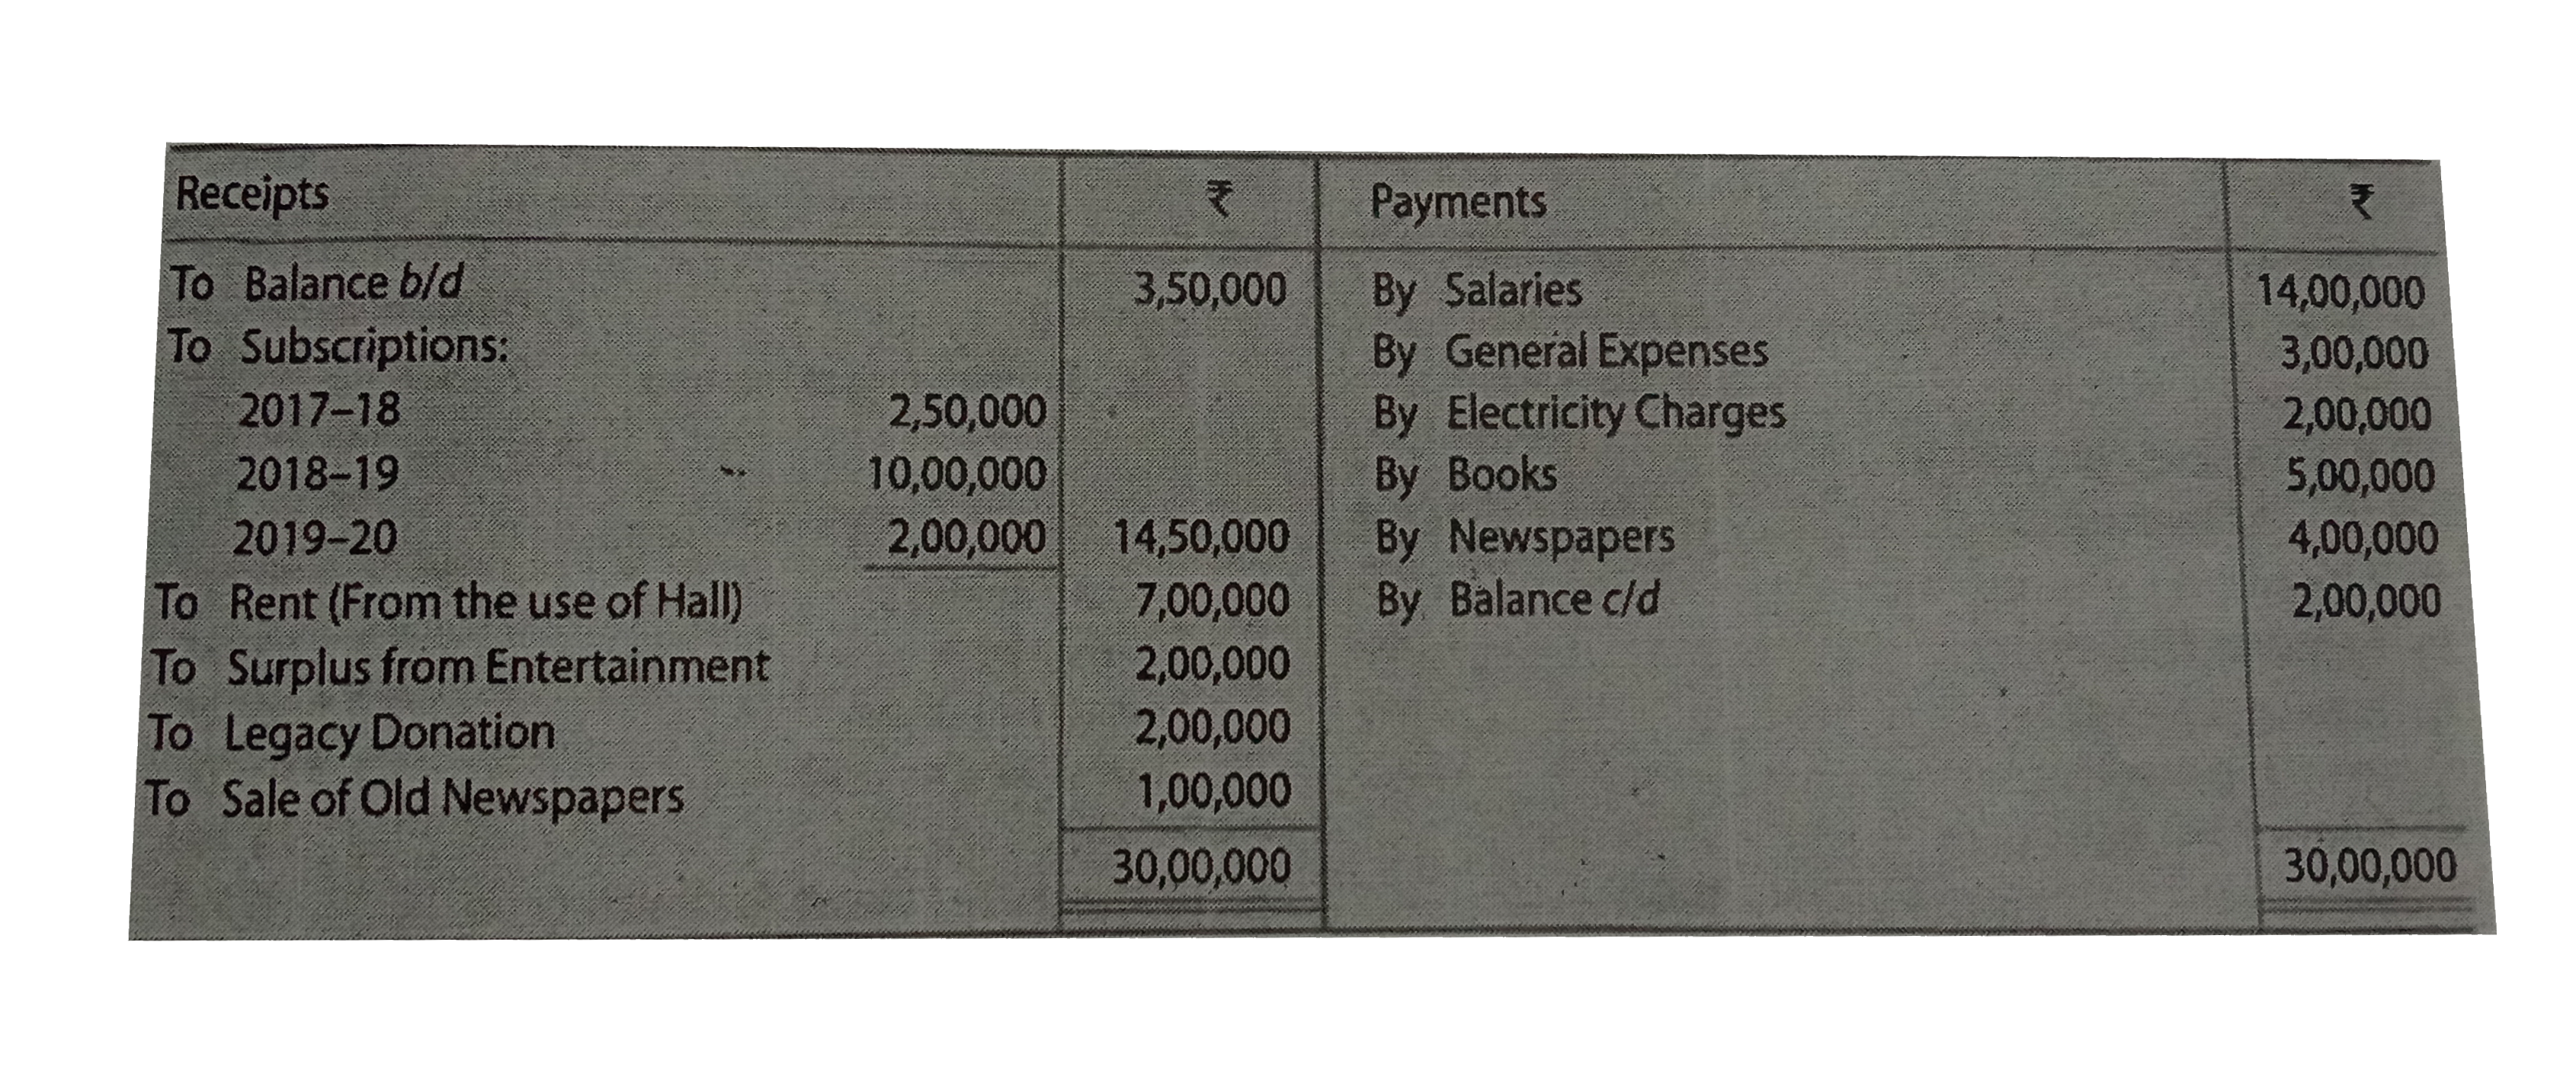 From the following Receipts and Payments Account of Defence Club and from the information supplied prepare Income and Expenditure Account for the year ended 31st March 2019 and Balance  Sheet as that date:        (i) The Club has 50 members each paying an annual subscrption of Rs 25,000 . Subscriptions Outstanding  on 31st March 2018 were to the extent of Rs 3,00,000.   (ii) On 31st March 2019 Salaries Outstanding amounted to Rs 1,00,000 . salaries paid during 2018-19 included Rs. 3,00,000 for the year 2017-18.   (iii) On 1st April 2018 the club owned  Building valued at Rs 1,00,00,000 furniture worth Rs. 10,00,000 and books Rs 10,00,000.   (iv) Legacy donation is for construction of Gymnasium.